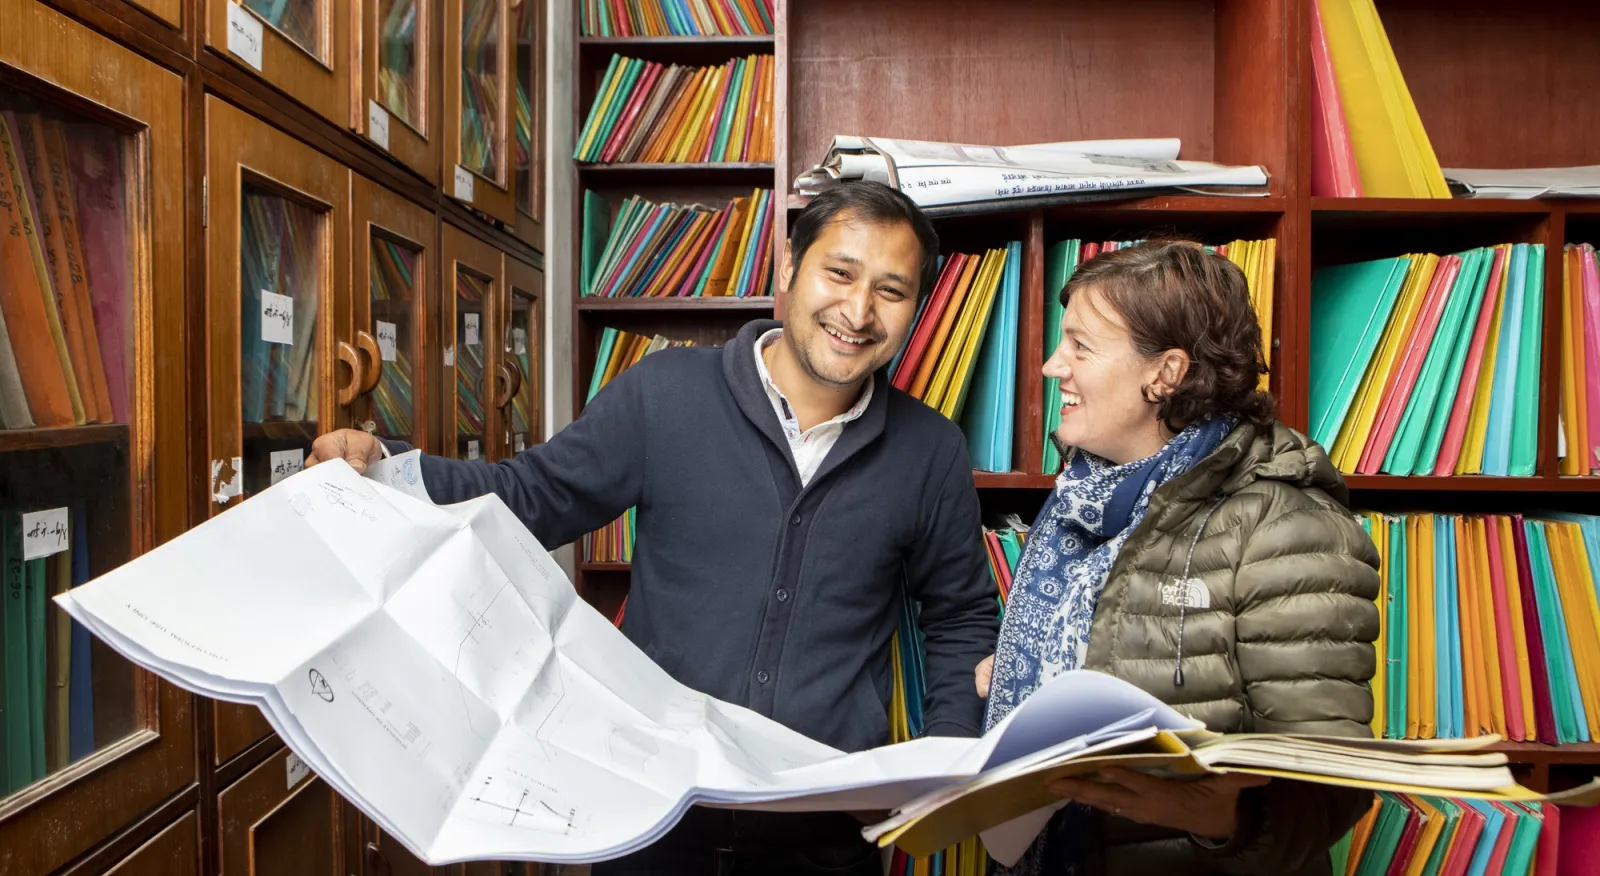 A man and a woman are dressed in jackets, standing in an office library filled with shelves of colorful folders. The man and woman have a large map open, and are smiling.